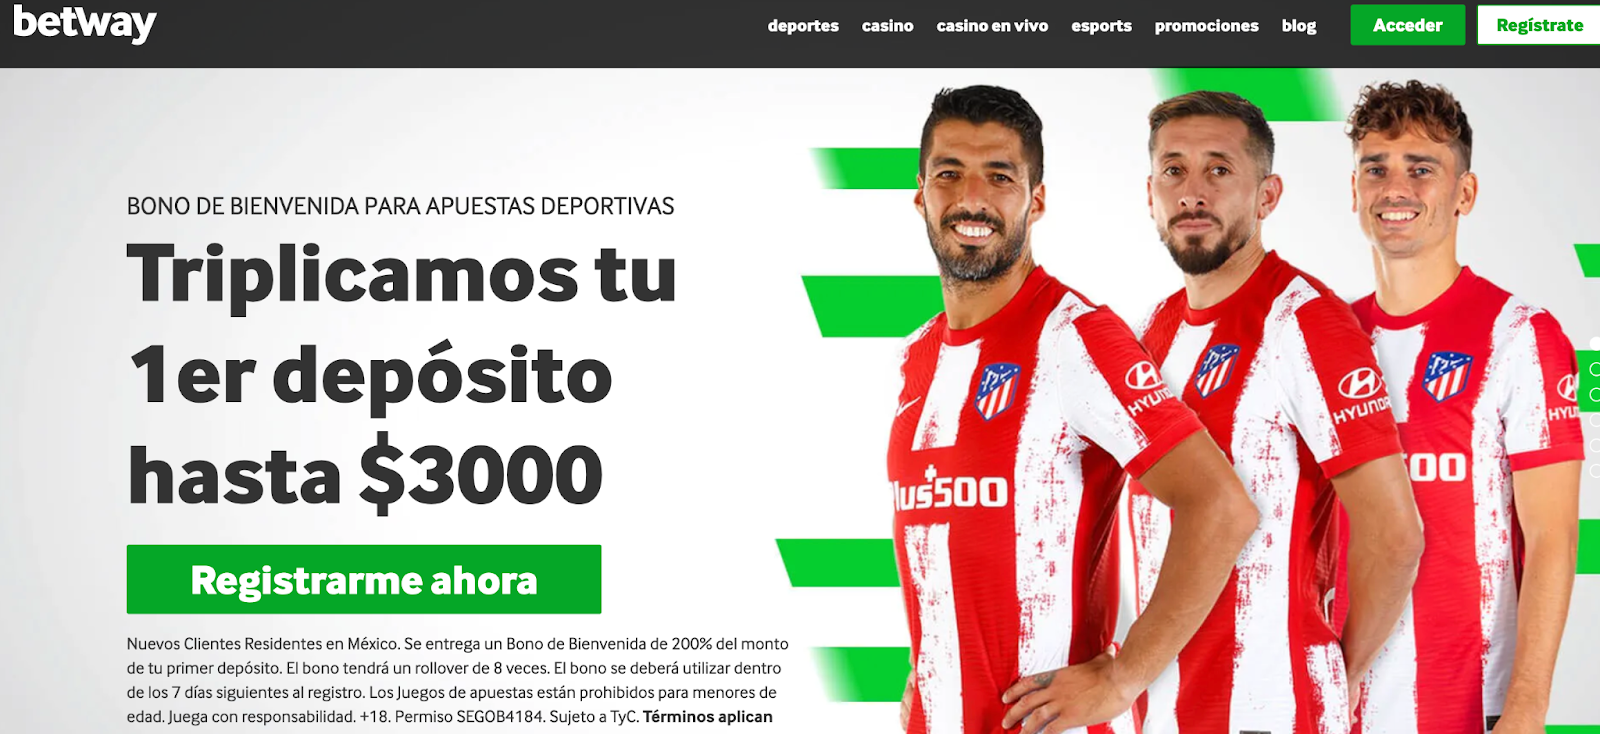 Image of betway mexico homepage showing login and register features